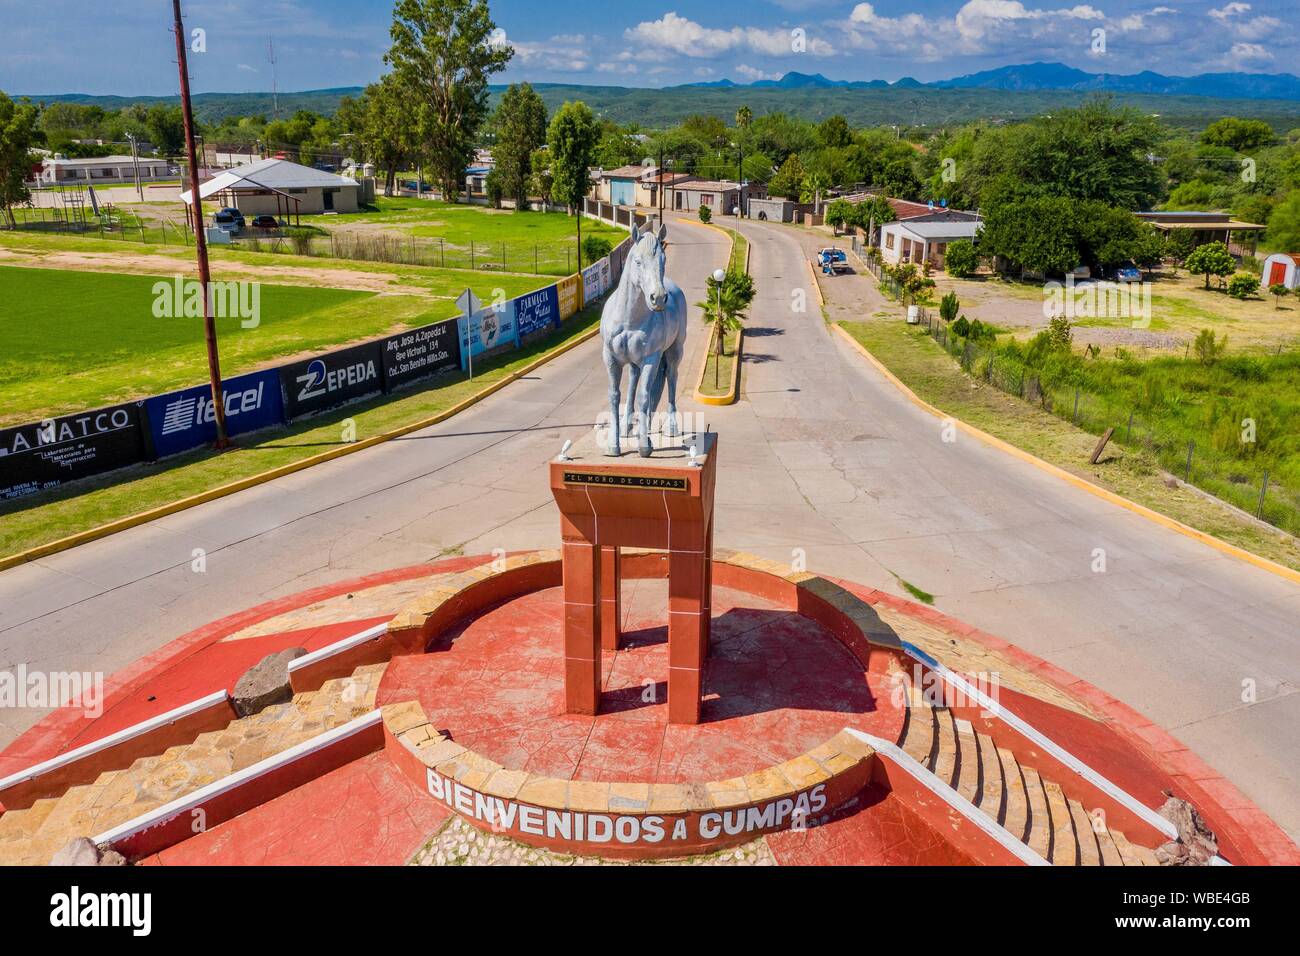 Aerial view of the statue or monument of the famous horse, El Moro de Cumpas, the entrance of the town of Cumpas, Sonora, Mexico. Route of the Sierra in Sonora Mexico. located in the lower region of the Sierra Madre Occidente. It was founded in 1643 by the Jesuit missionary Egidio Monteffio under the name of Our Lady of the Assumption of Cumpas, with the purpose of evangelizing the Opal tribes that inhabited that place in the previous times and during the conquest.  (© Photo: LuisGutierrez / NortePhoto.com)  Vista aerea de la estatua o monumento del famoso caballo , El Moro de Cumpas, la entra Stock Photo